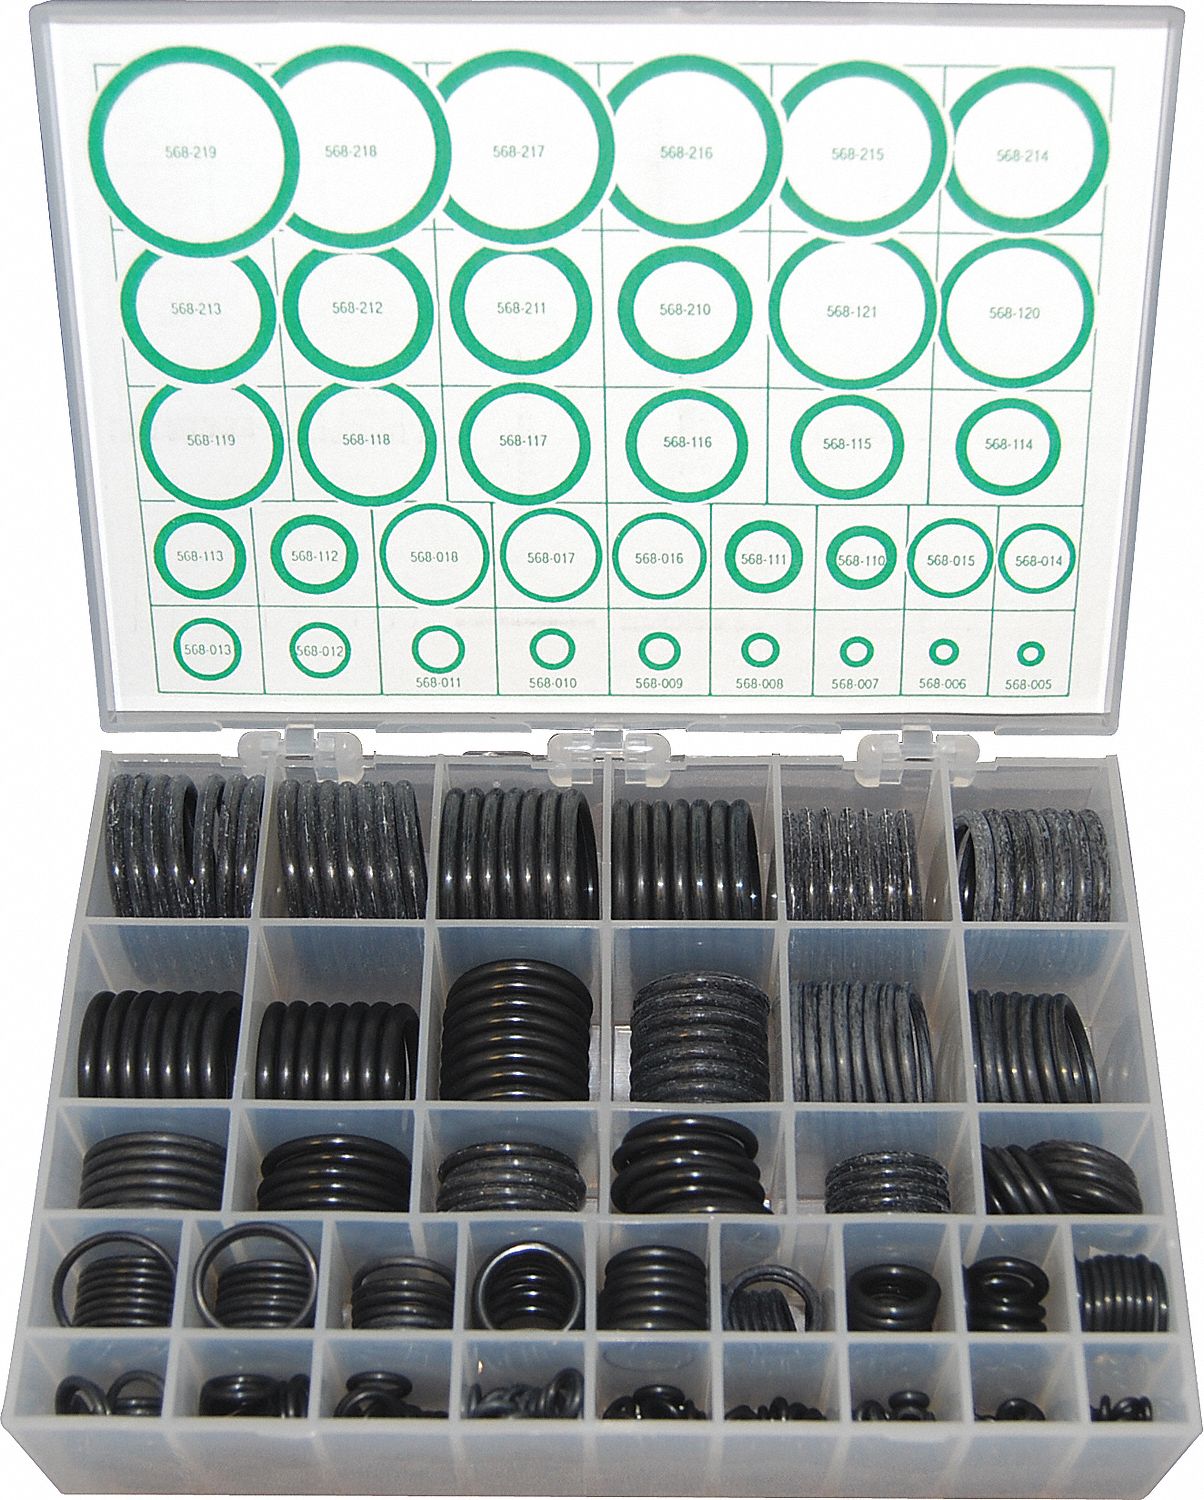 O-RING KIT, 90 DUROMETER, 36 DIFFERENT SIZES, BUNA N RUBBER, PC 436